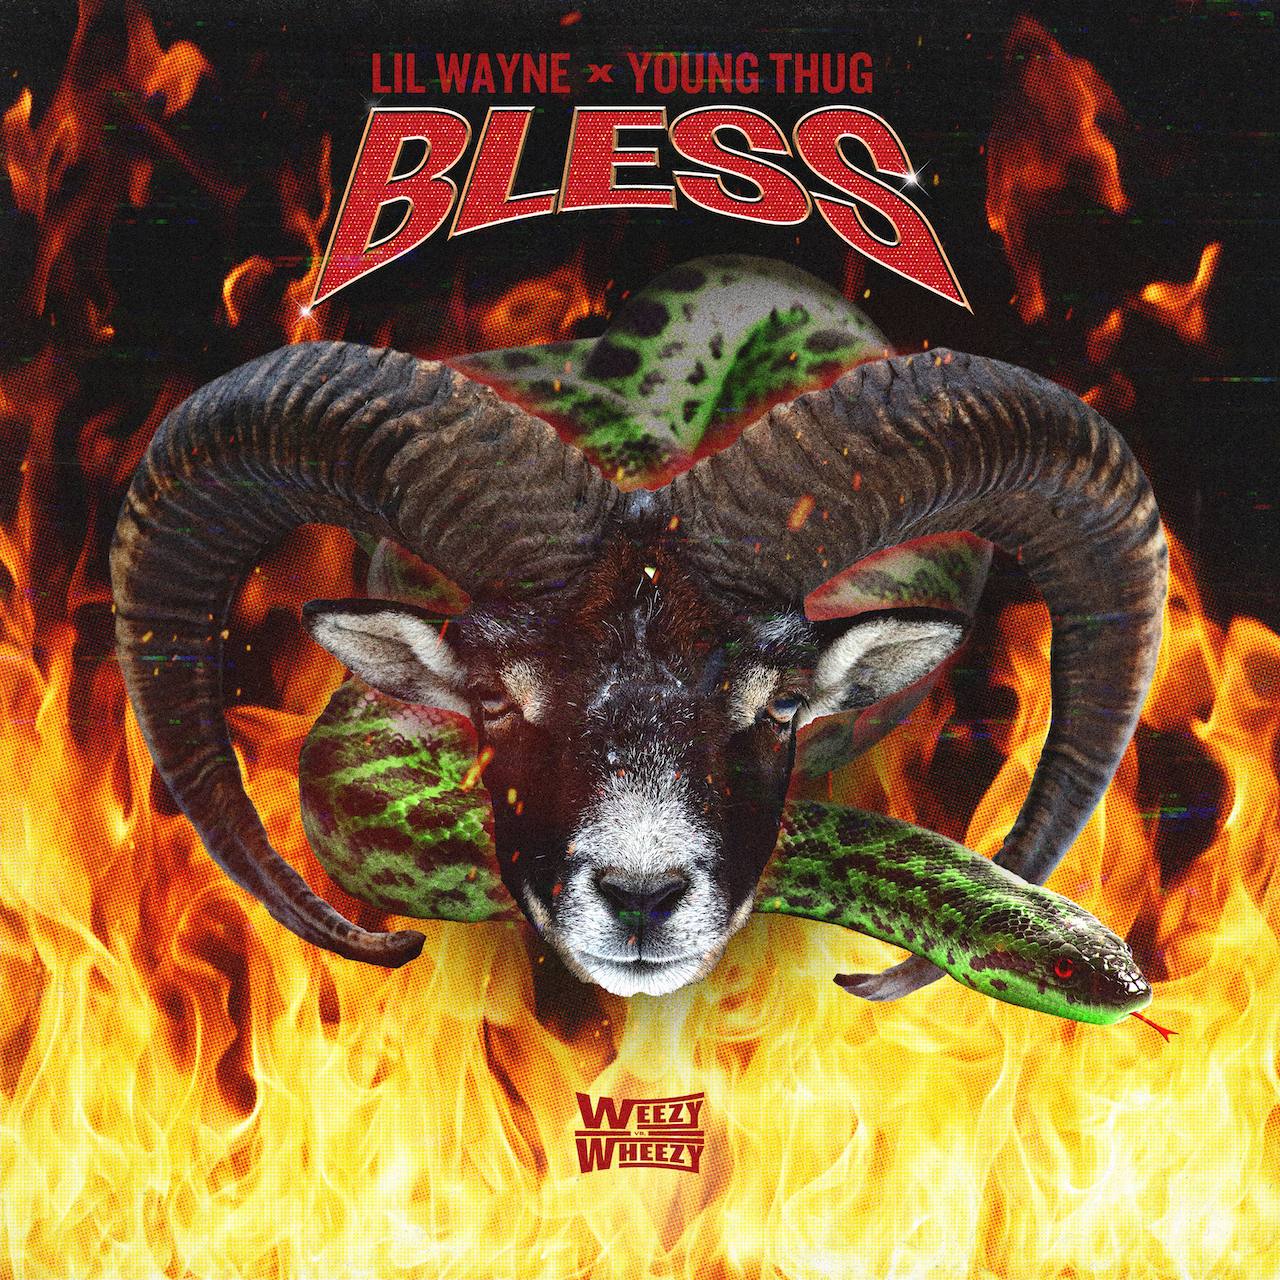 Lil Wayne Recruits Young Thug For New Single ‘Bless’